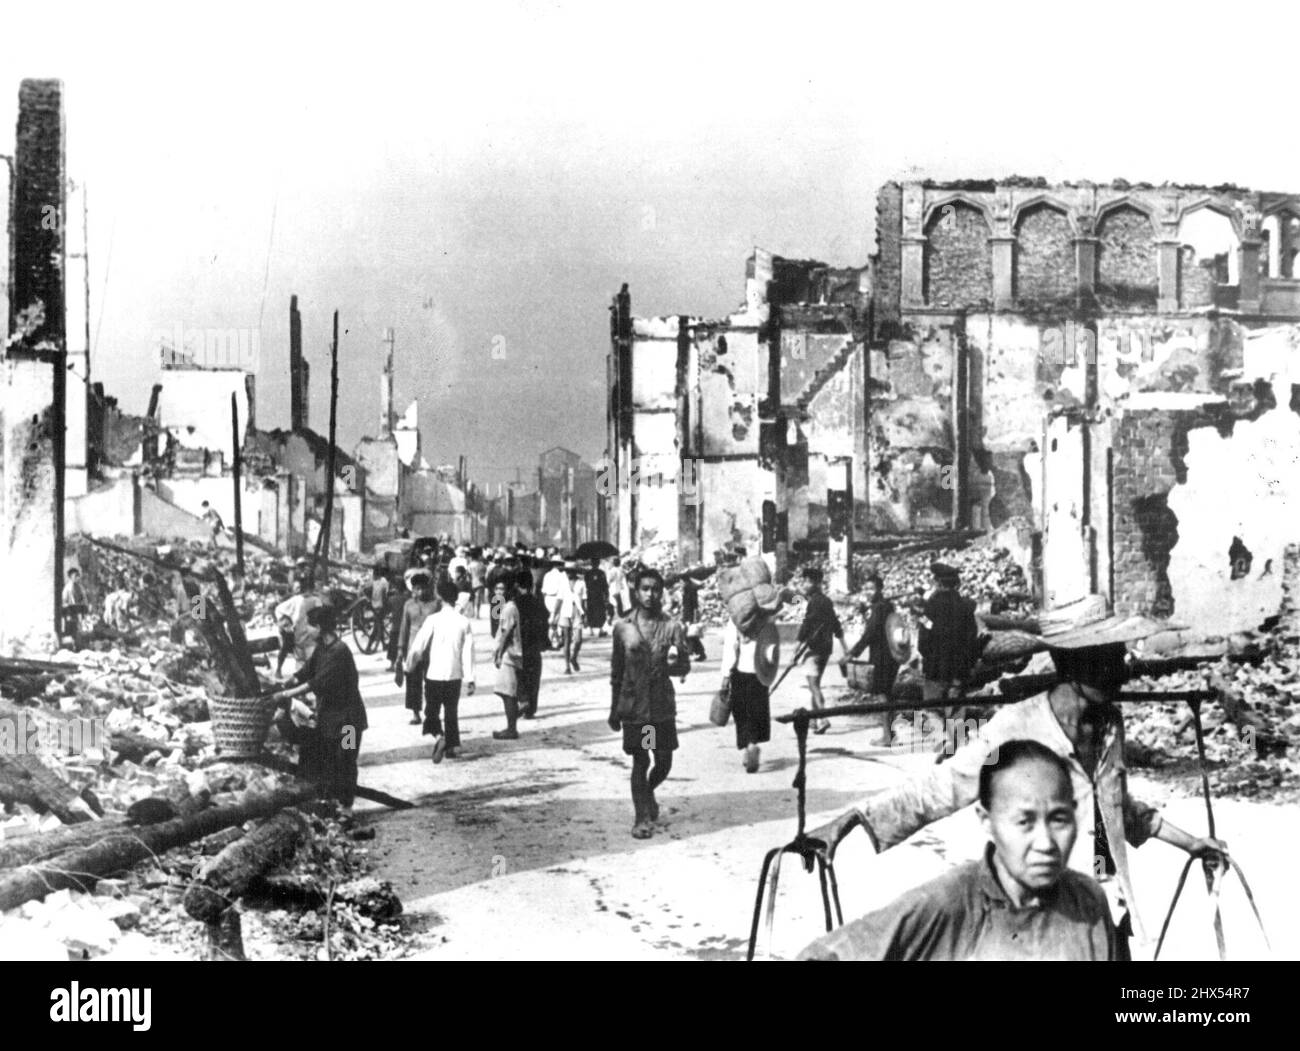 Life Goes On Amid Death. Less than one of five buildings in the Ancient and congested walled city area of Chungking was unscathed after three months of aerial bombardment of China's wartime Capital was Climaxed by a five day and night attack which ended Aug.23. Nothing but ruins may be seen in this picture, but Chinese Citizens Carry on, Seemingly unperturbed by it all. November 9, 1940. (Photo by Associated Press Photo). Stock Photo